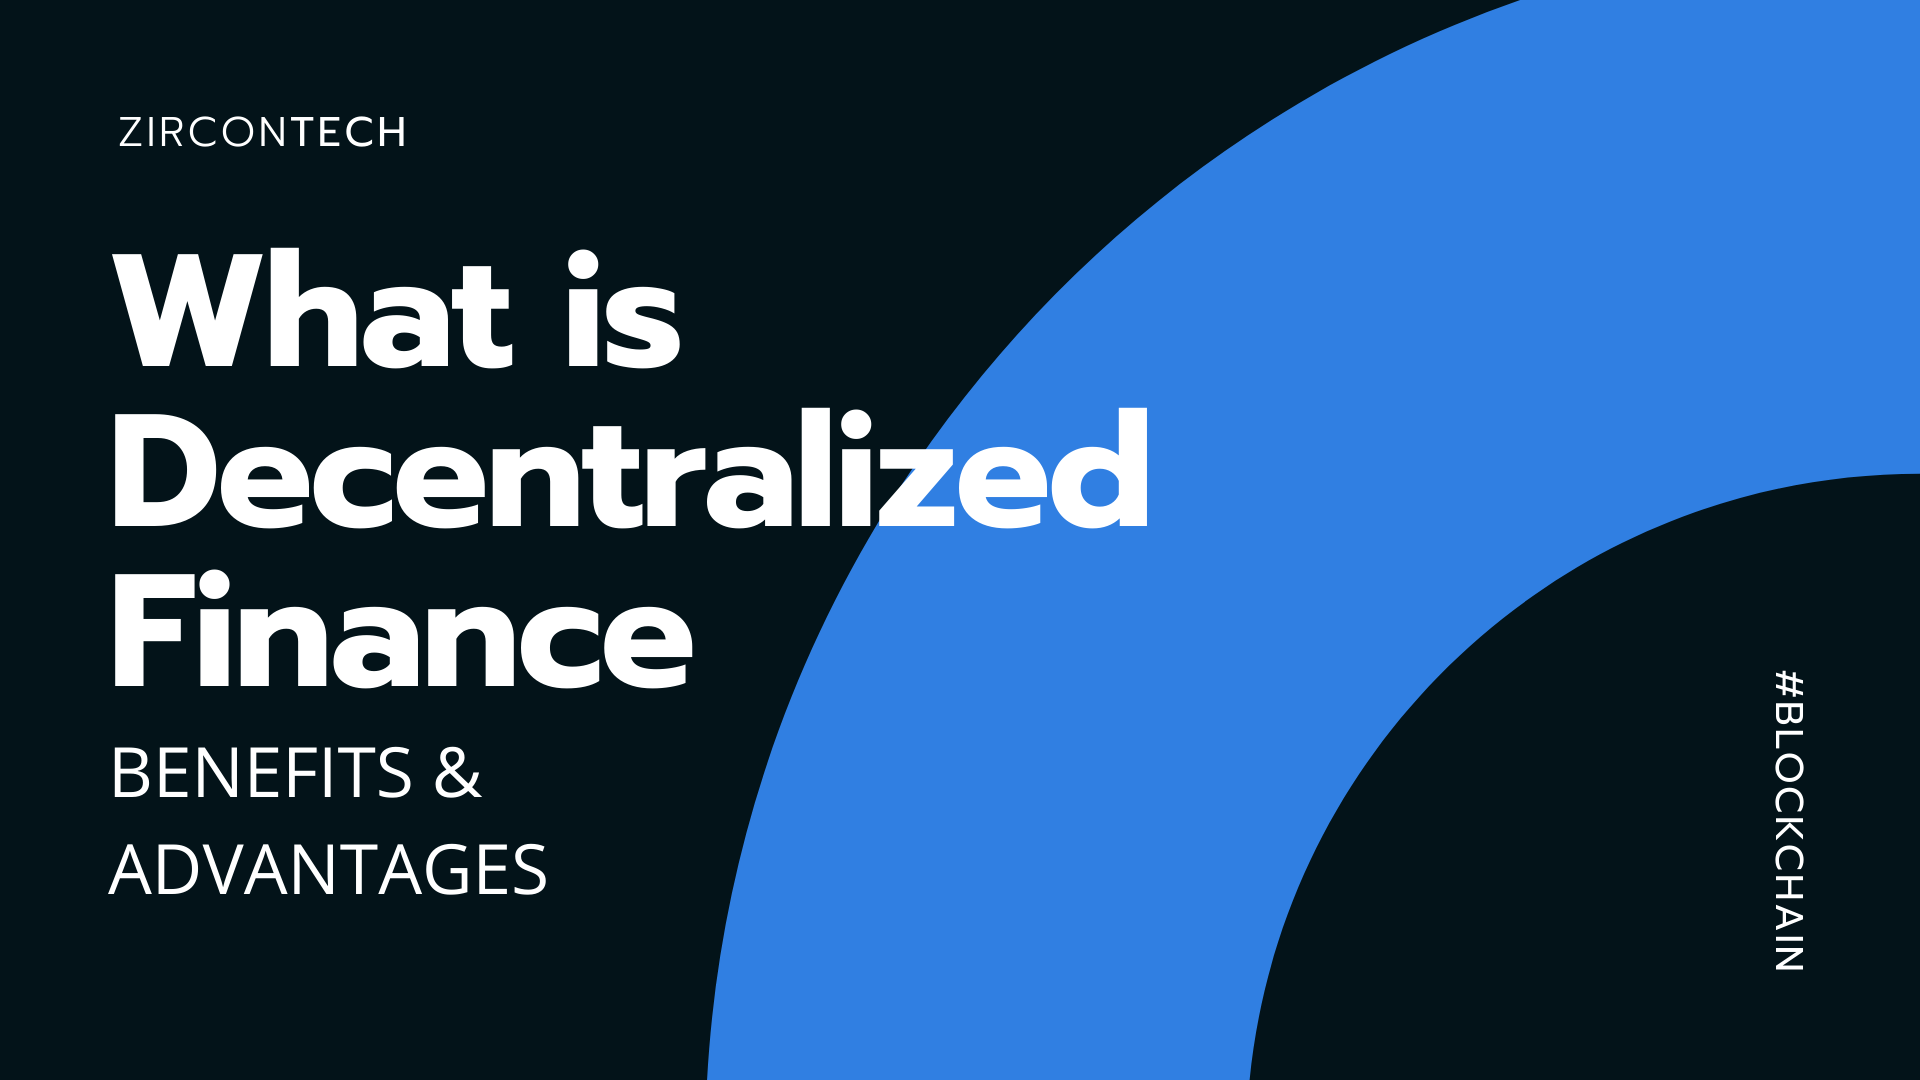 Benefits and Advantages of Decentralized Finance - DeFi, related to Blockchain